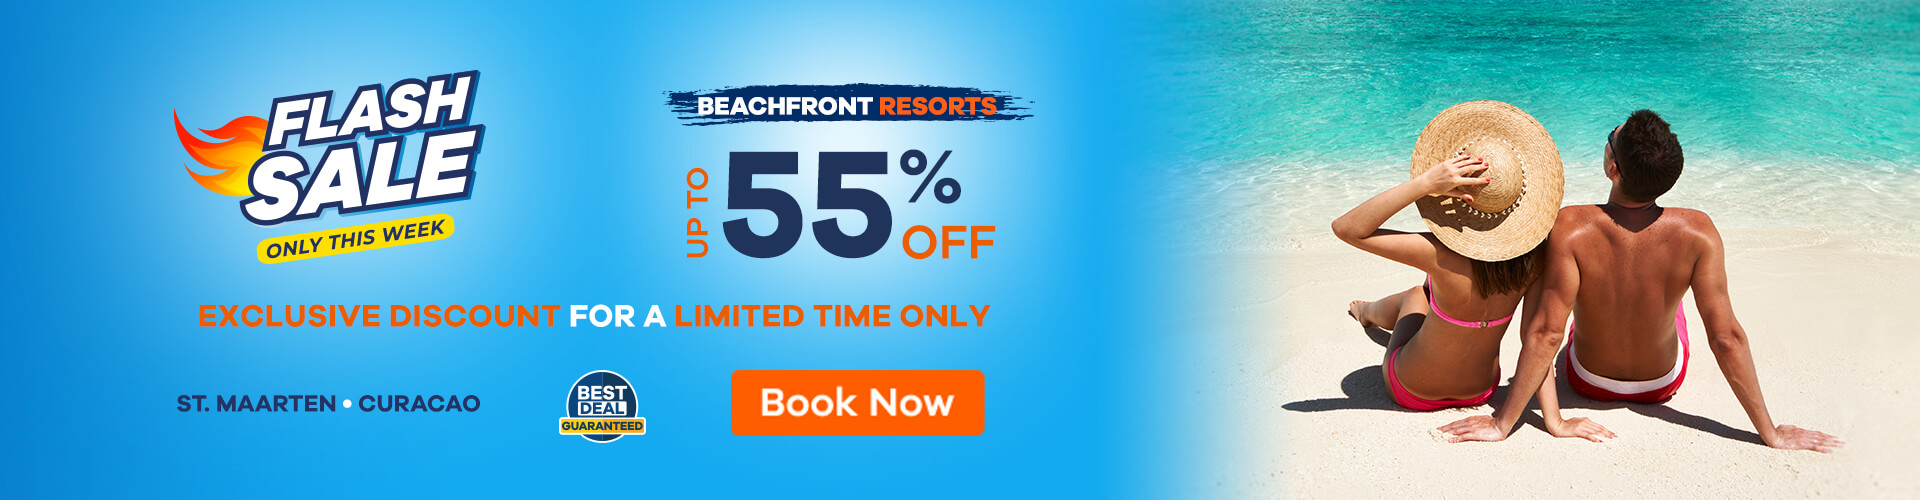 ST MAARTEN & CURACAO FLASH SALE WITH UP TO 55% OFF